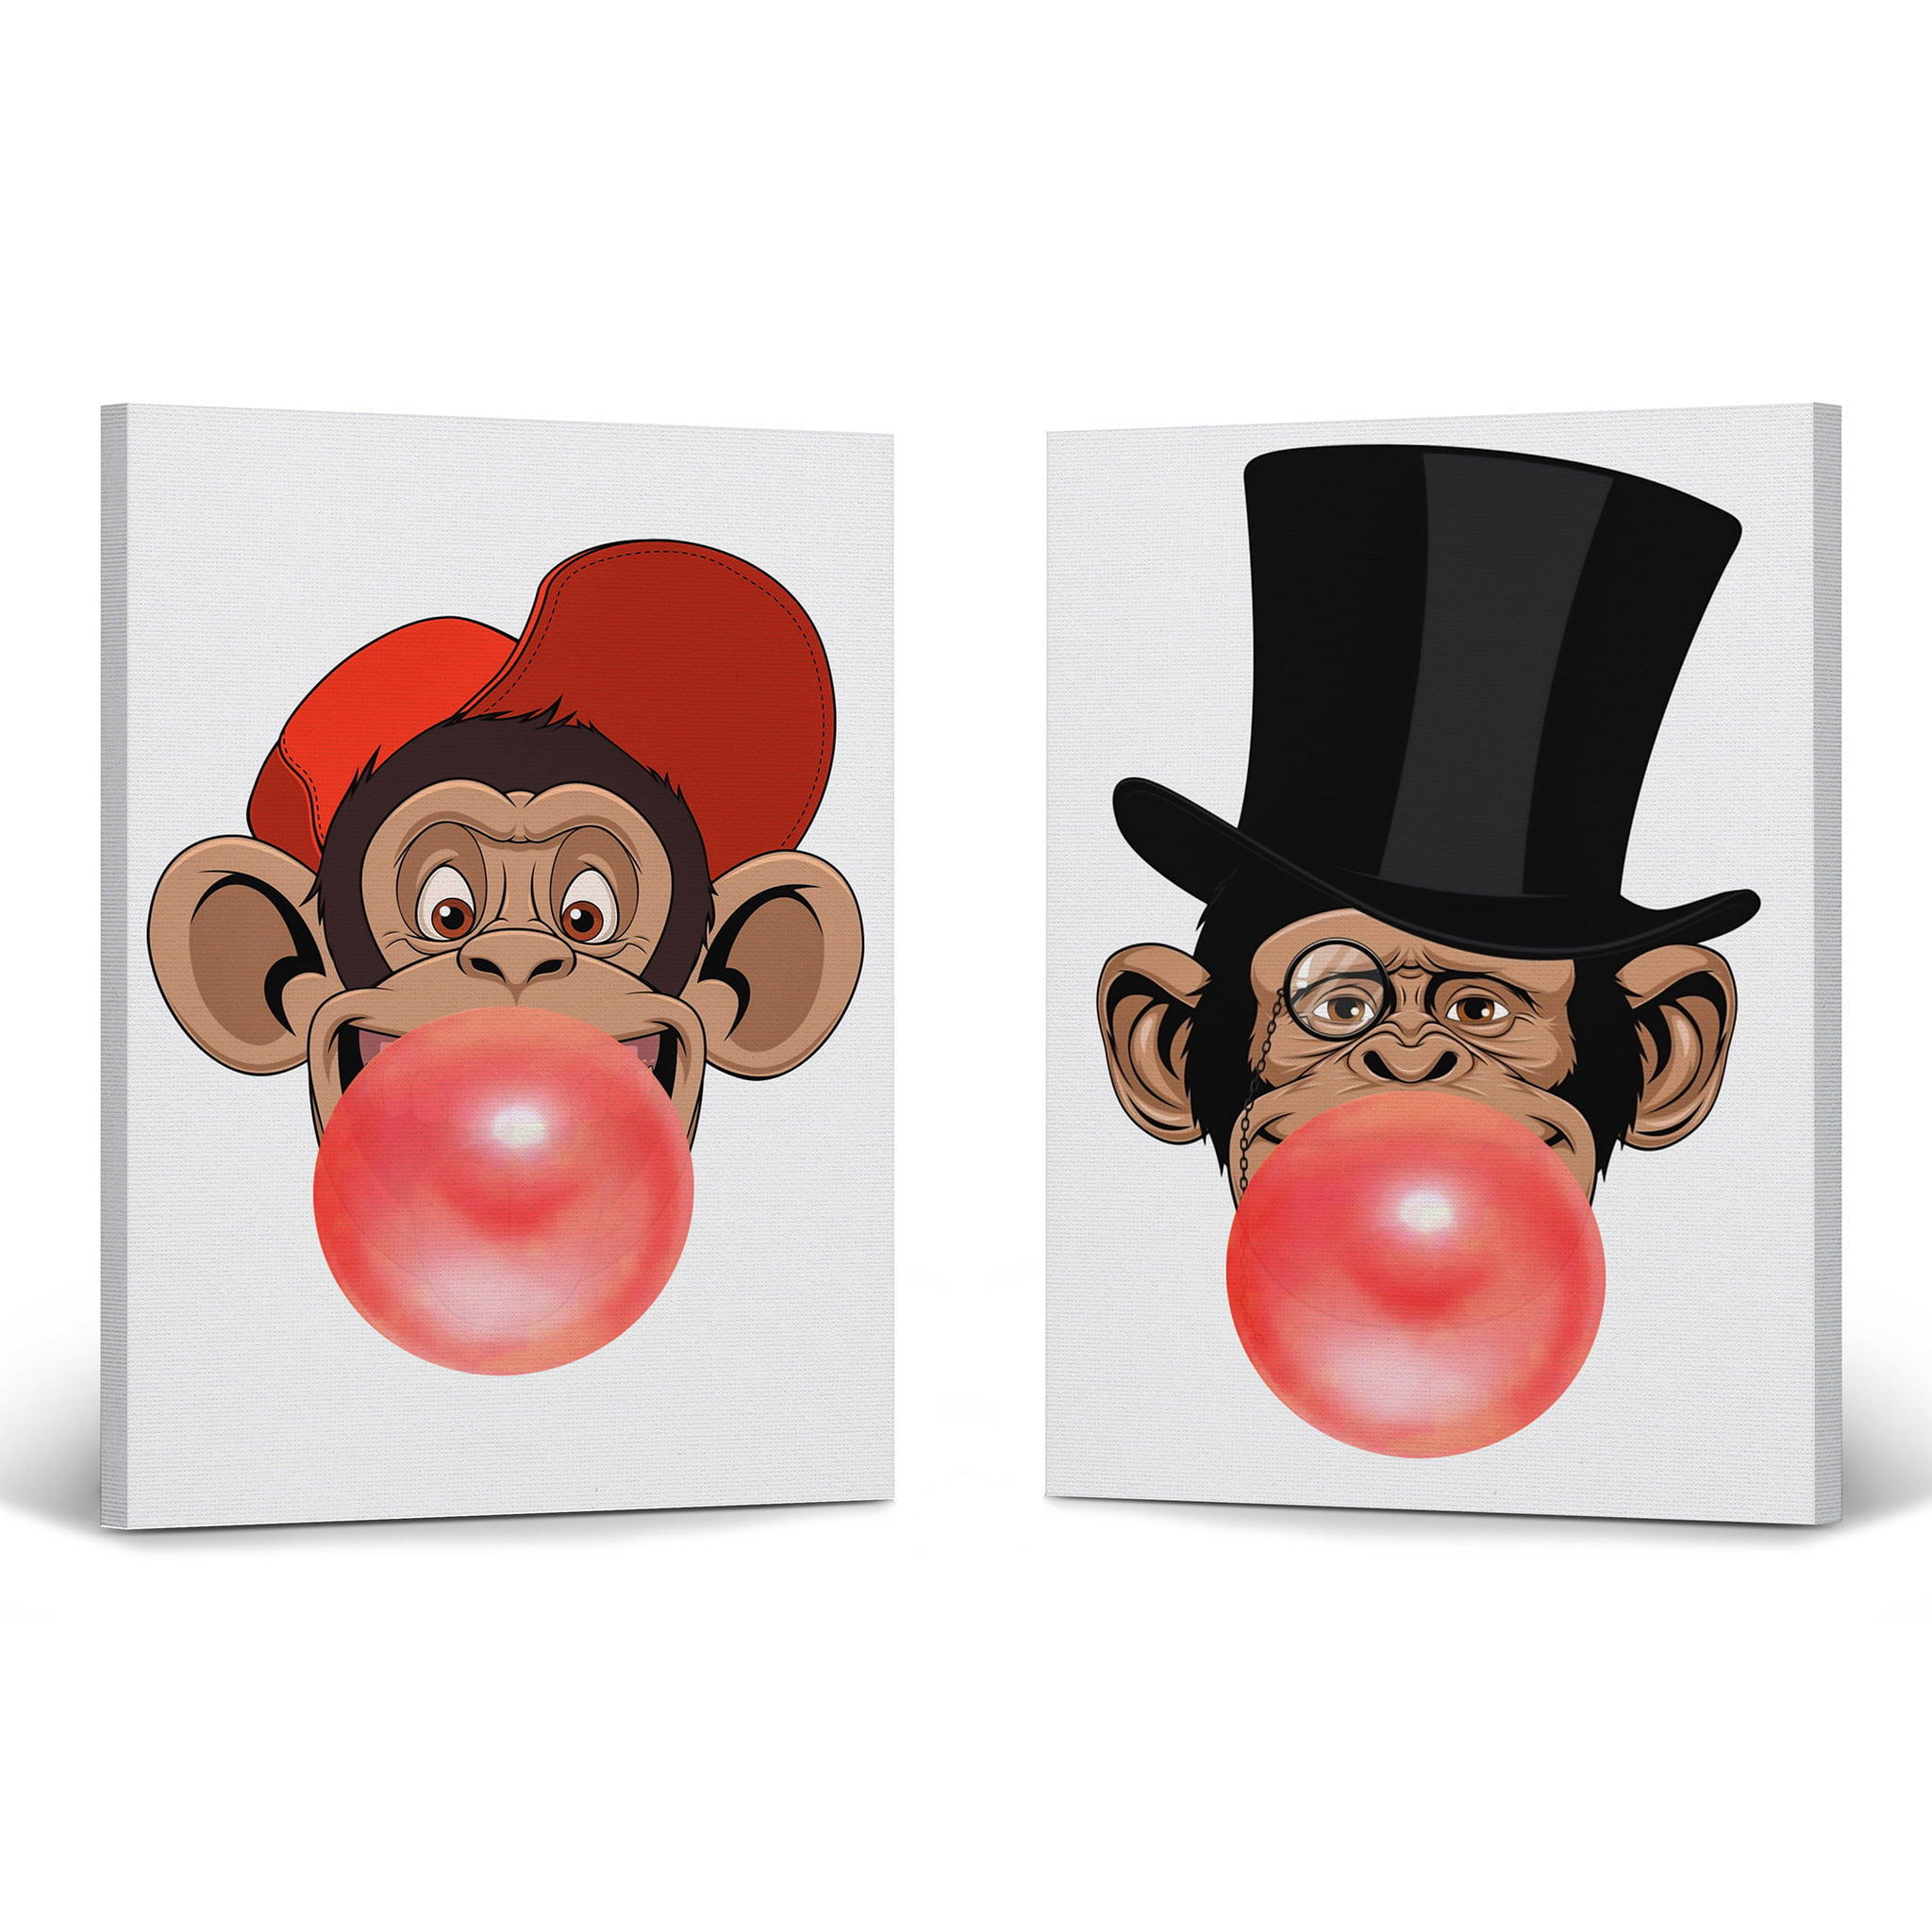 Smile Art Design Funny Monkeys Young and Senior Animal Bubble Gum Art 2  PANEL CANVAS PRINT SET Red Chewing Gum Wall Art Home Decor Living Room Kids  Room Nursery Ready to Hang